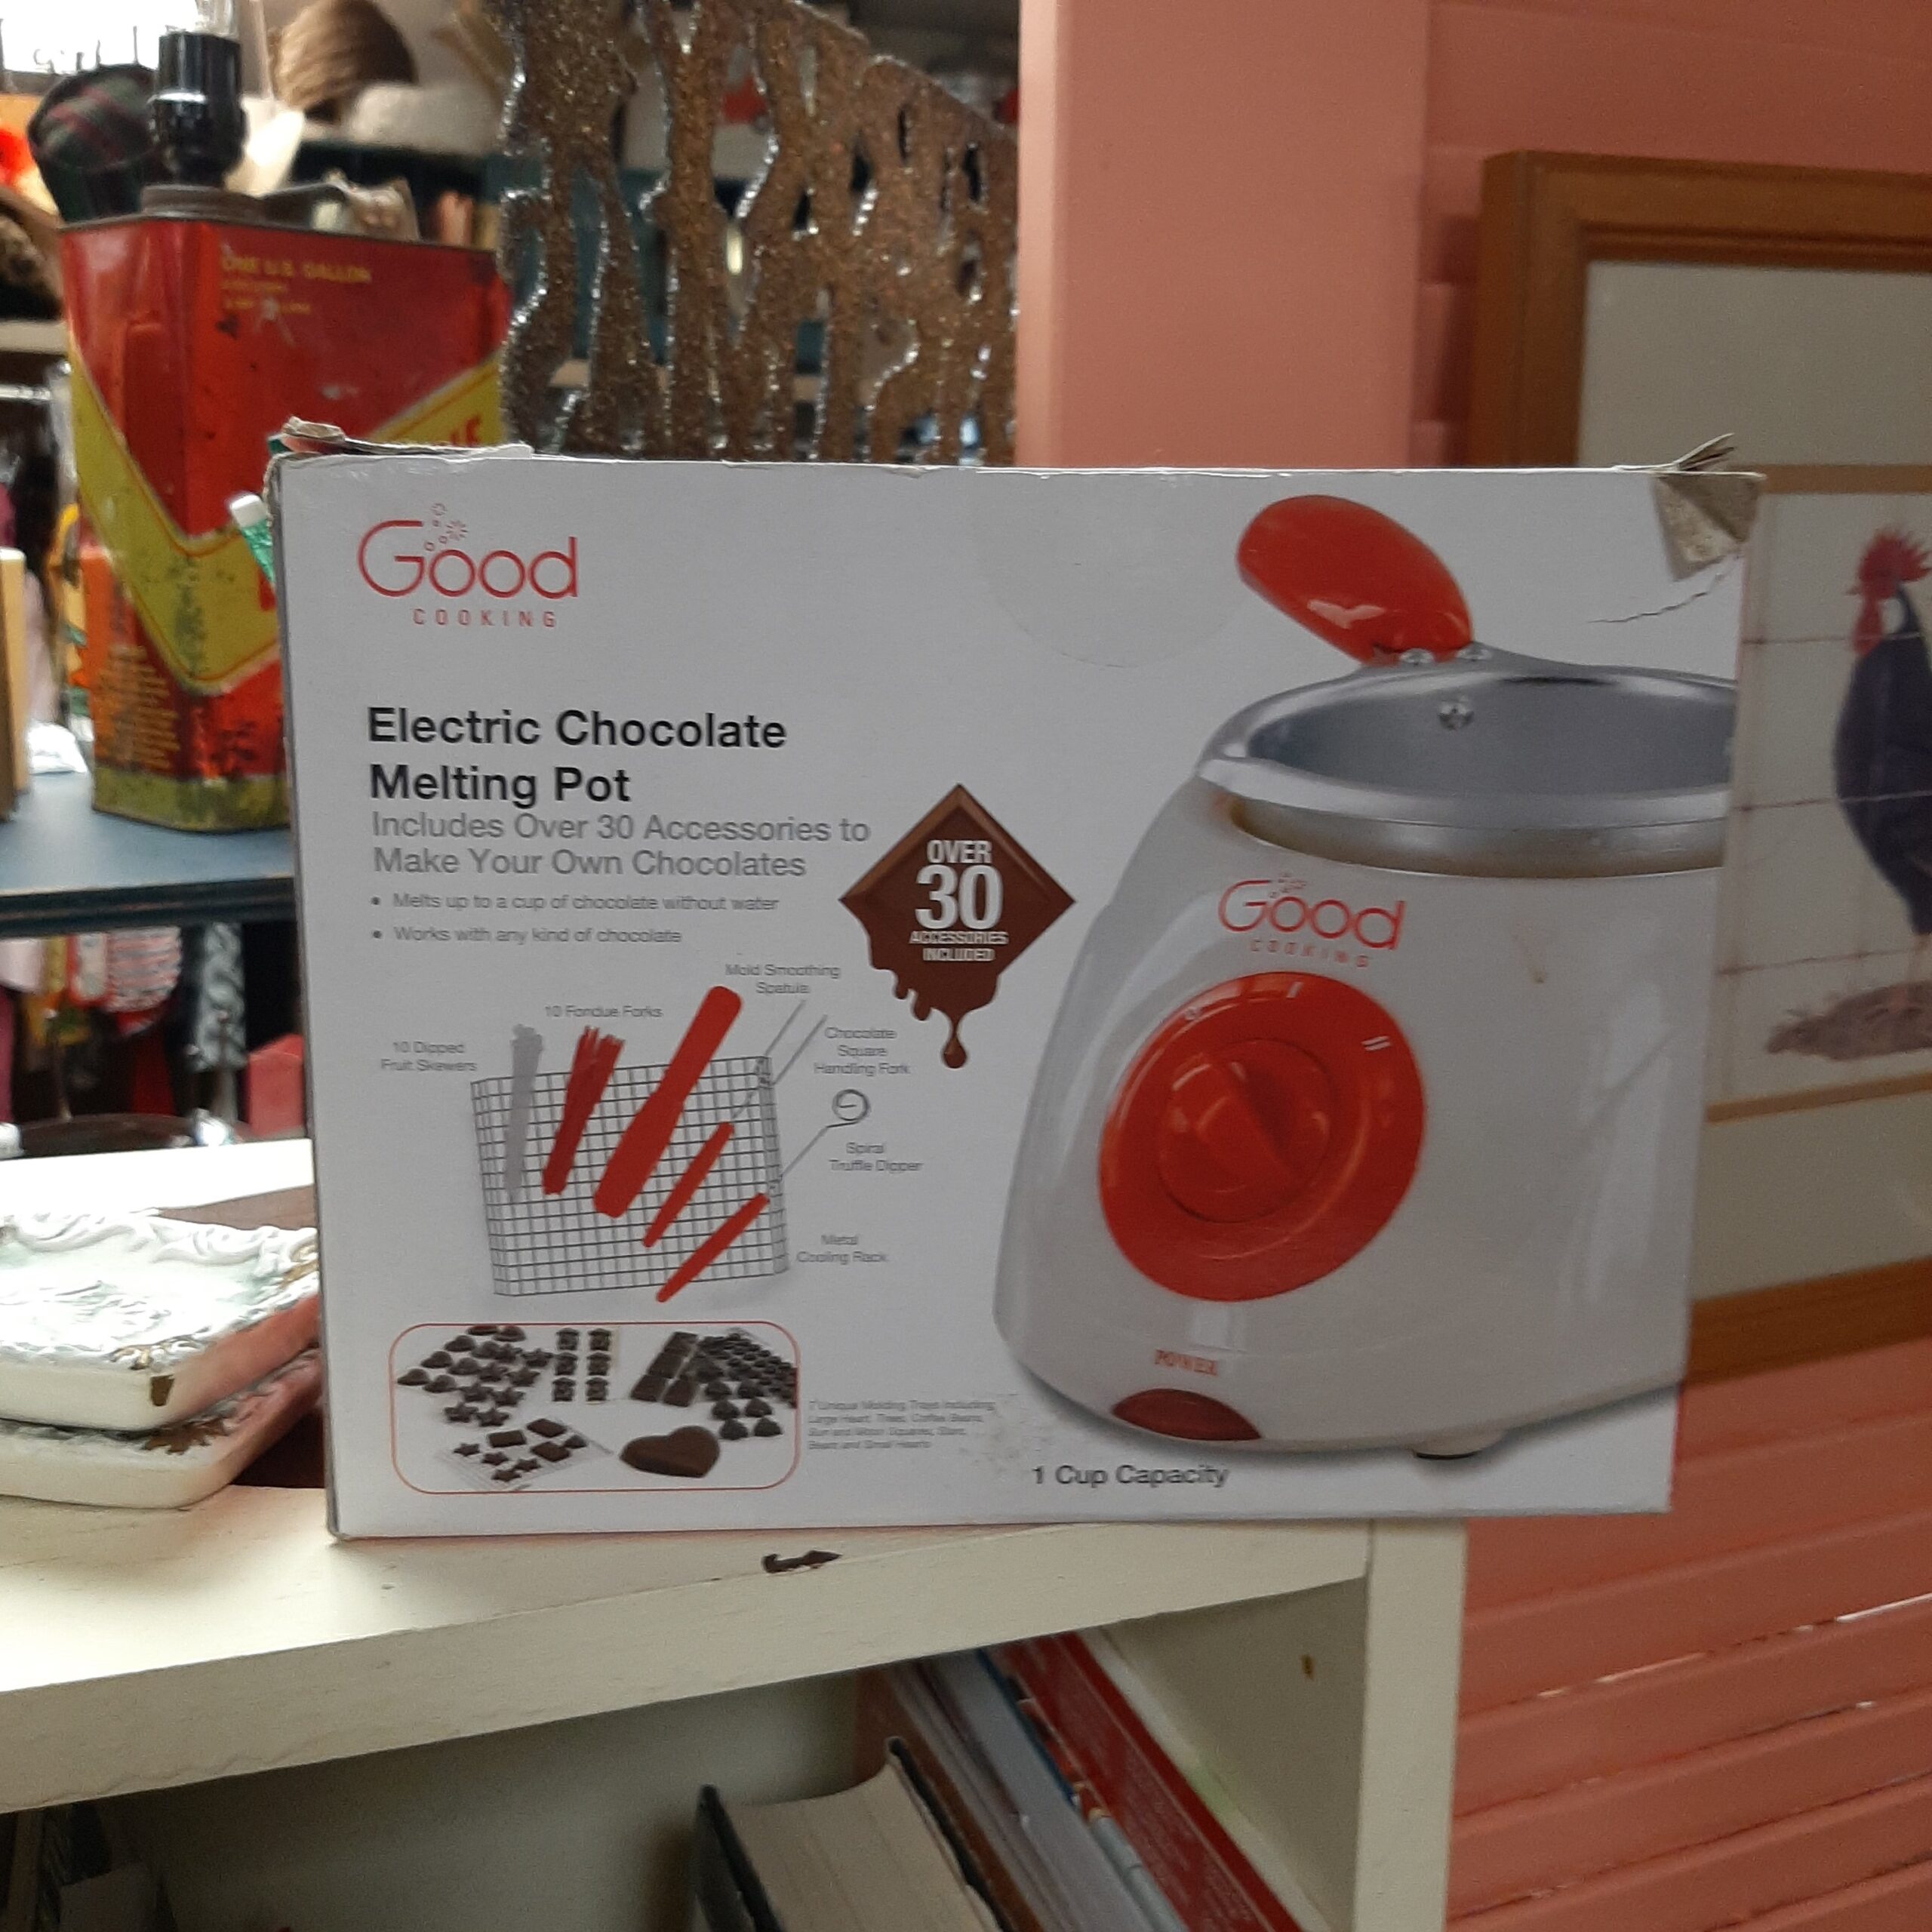 Good Cooking Electric Chocolate Melting Pot – New in Box with Accessories –  It's Bazaar on 21st Street